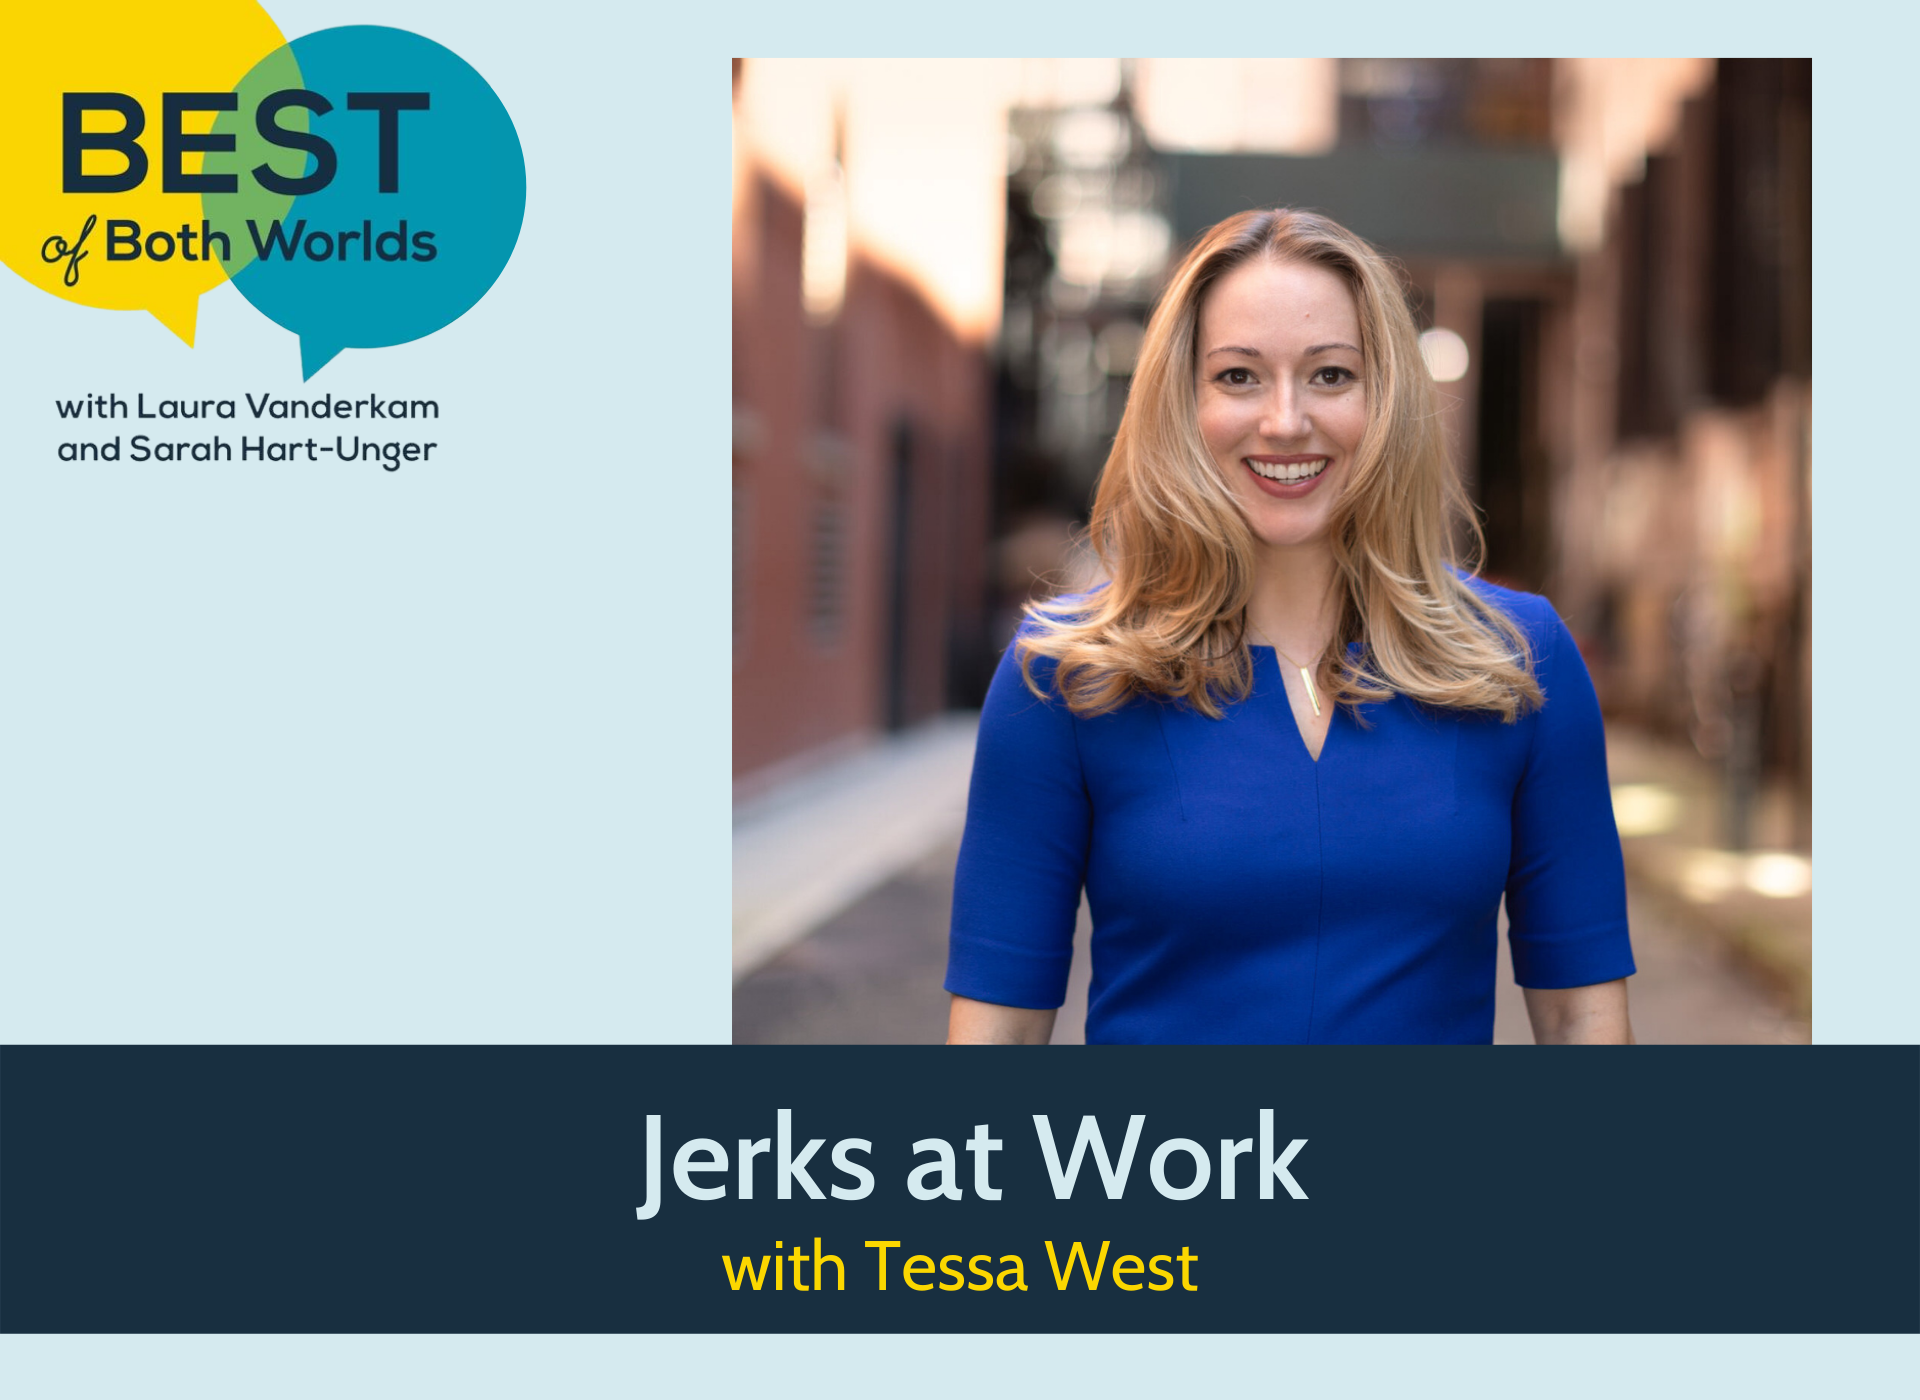 Best of Both Worlds podcast: Jerks at Work with Tessa West - Laura Vanderkam